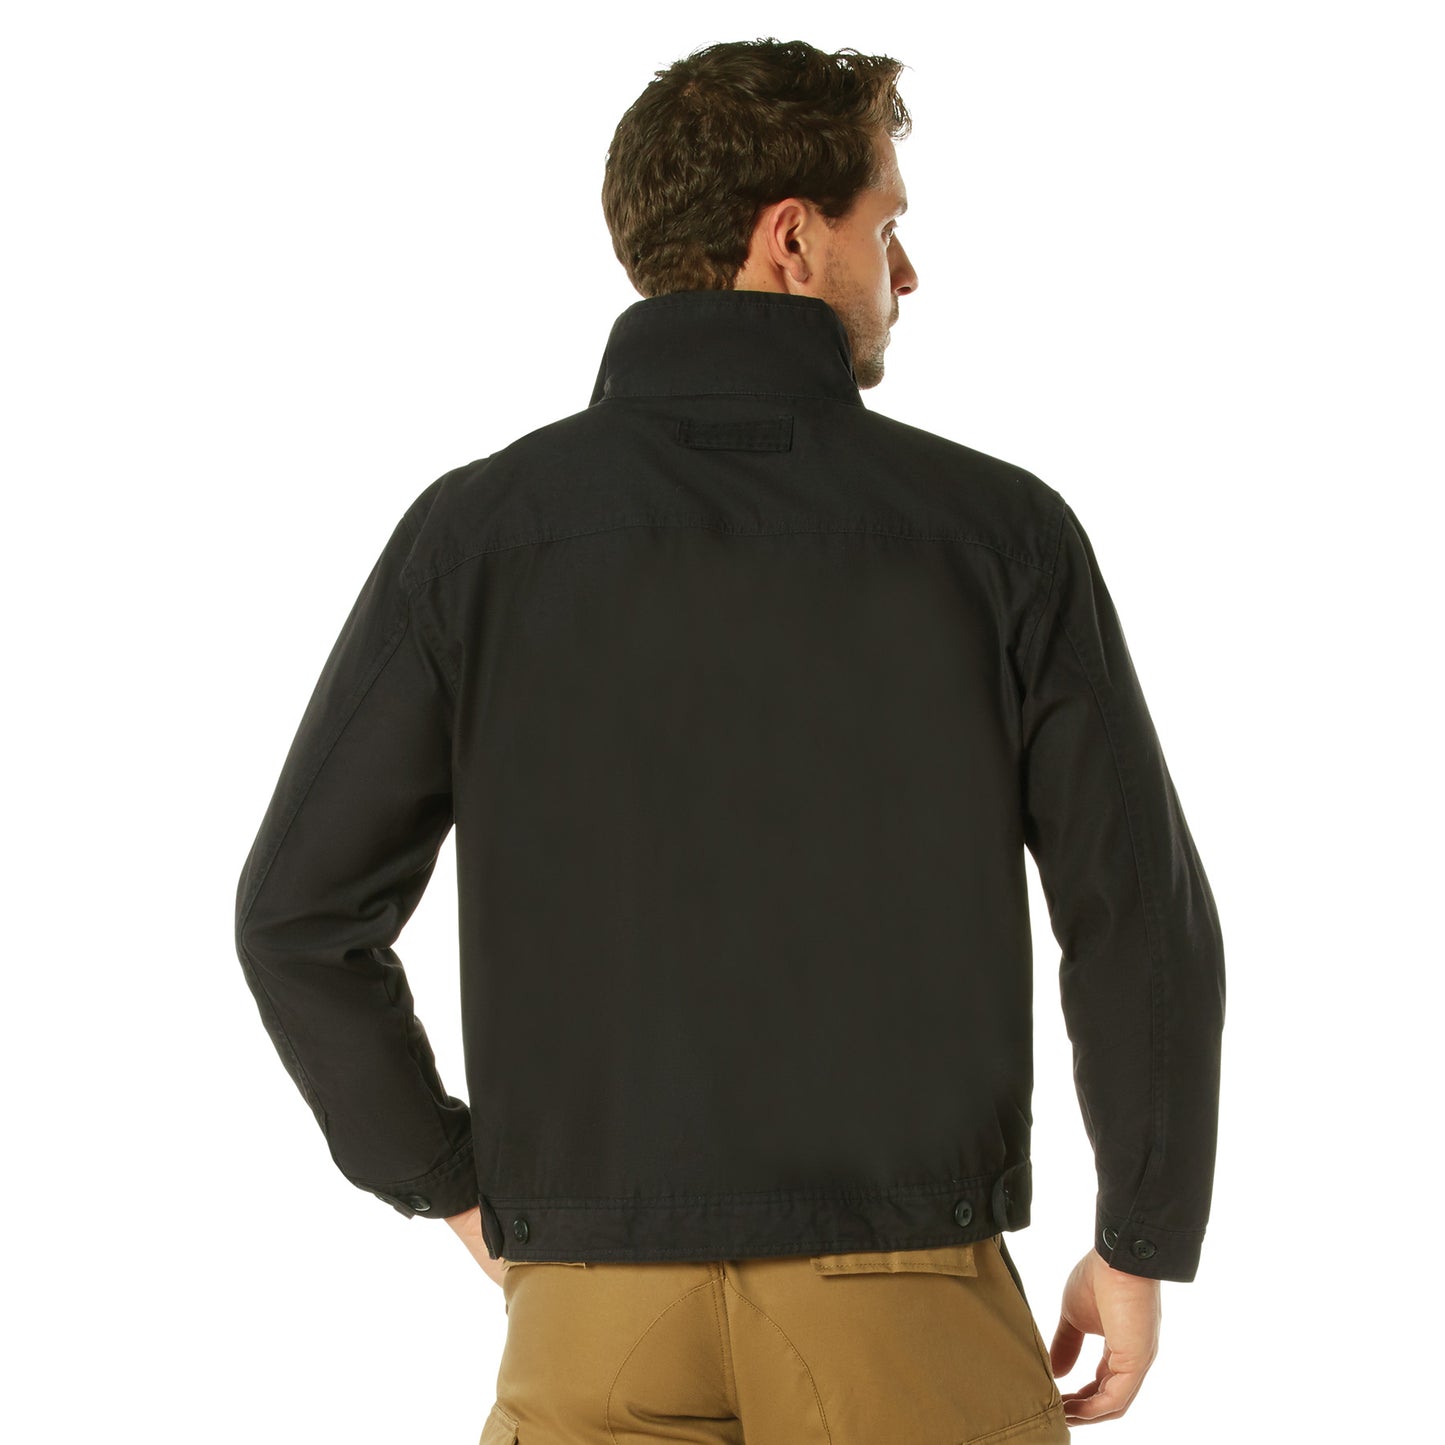 Rothco Lightweight Concealed Carry Jacket